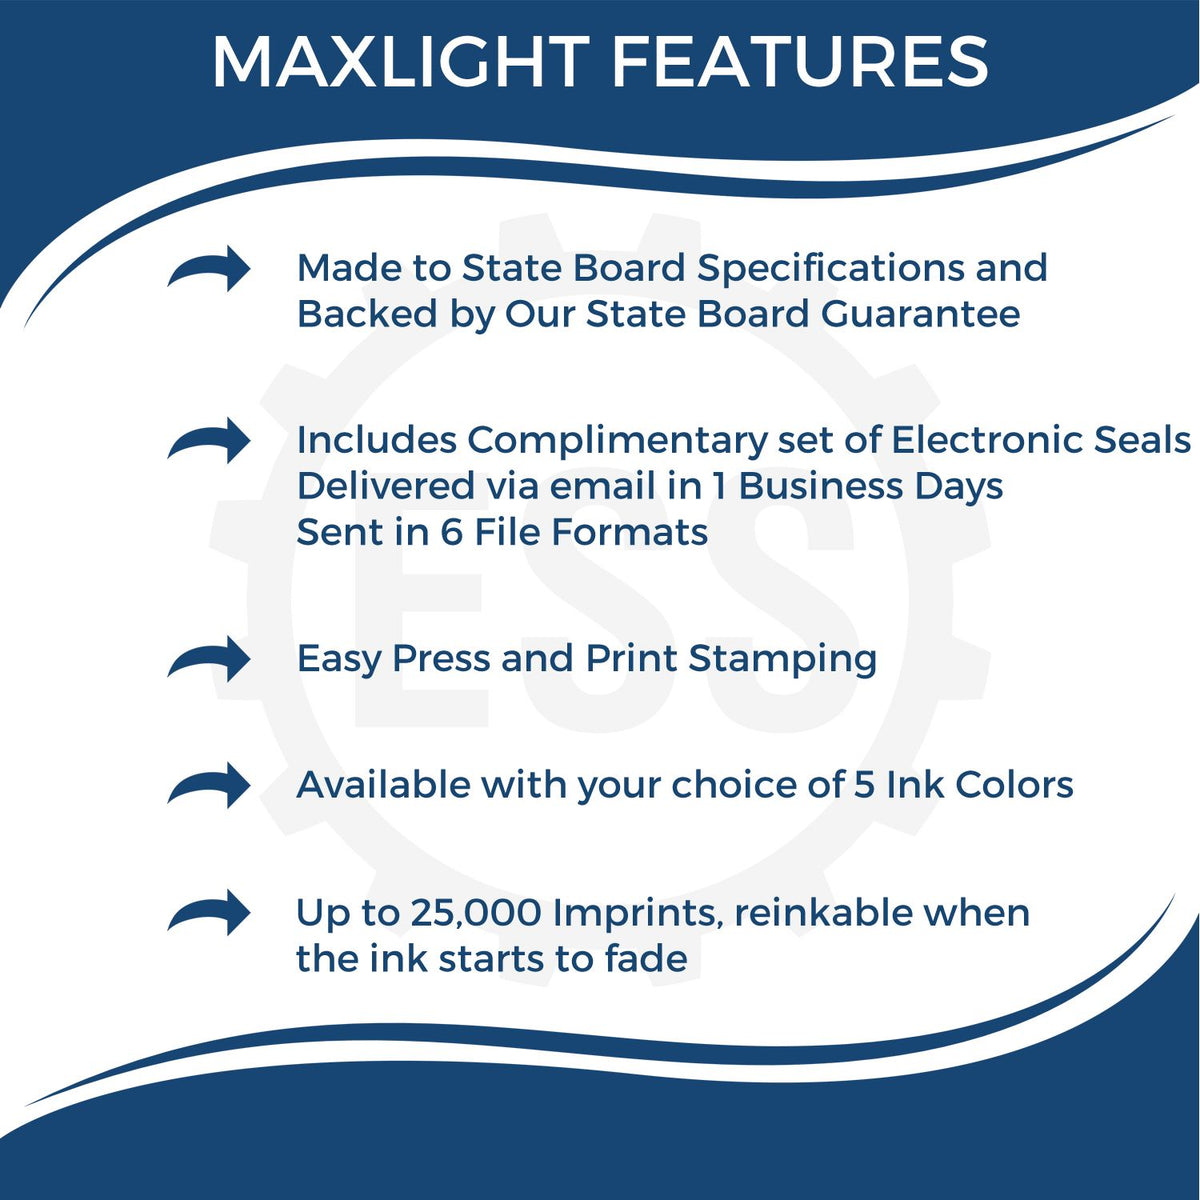 A picture of an infographic highlighting the selling points for the Premium MaxLight Pre-Inked Guam Engineering Stamp